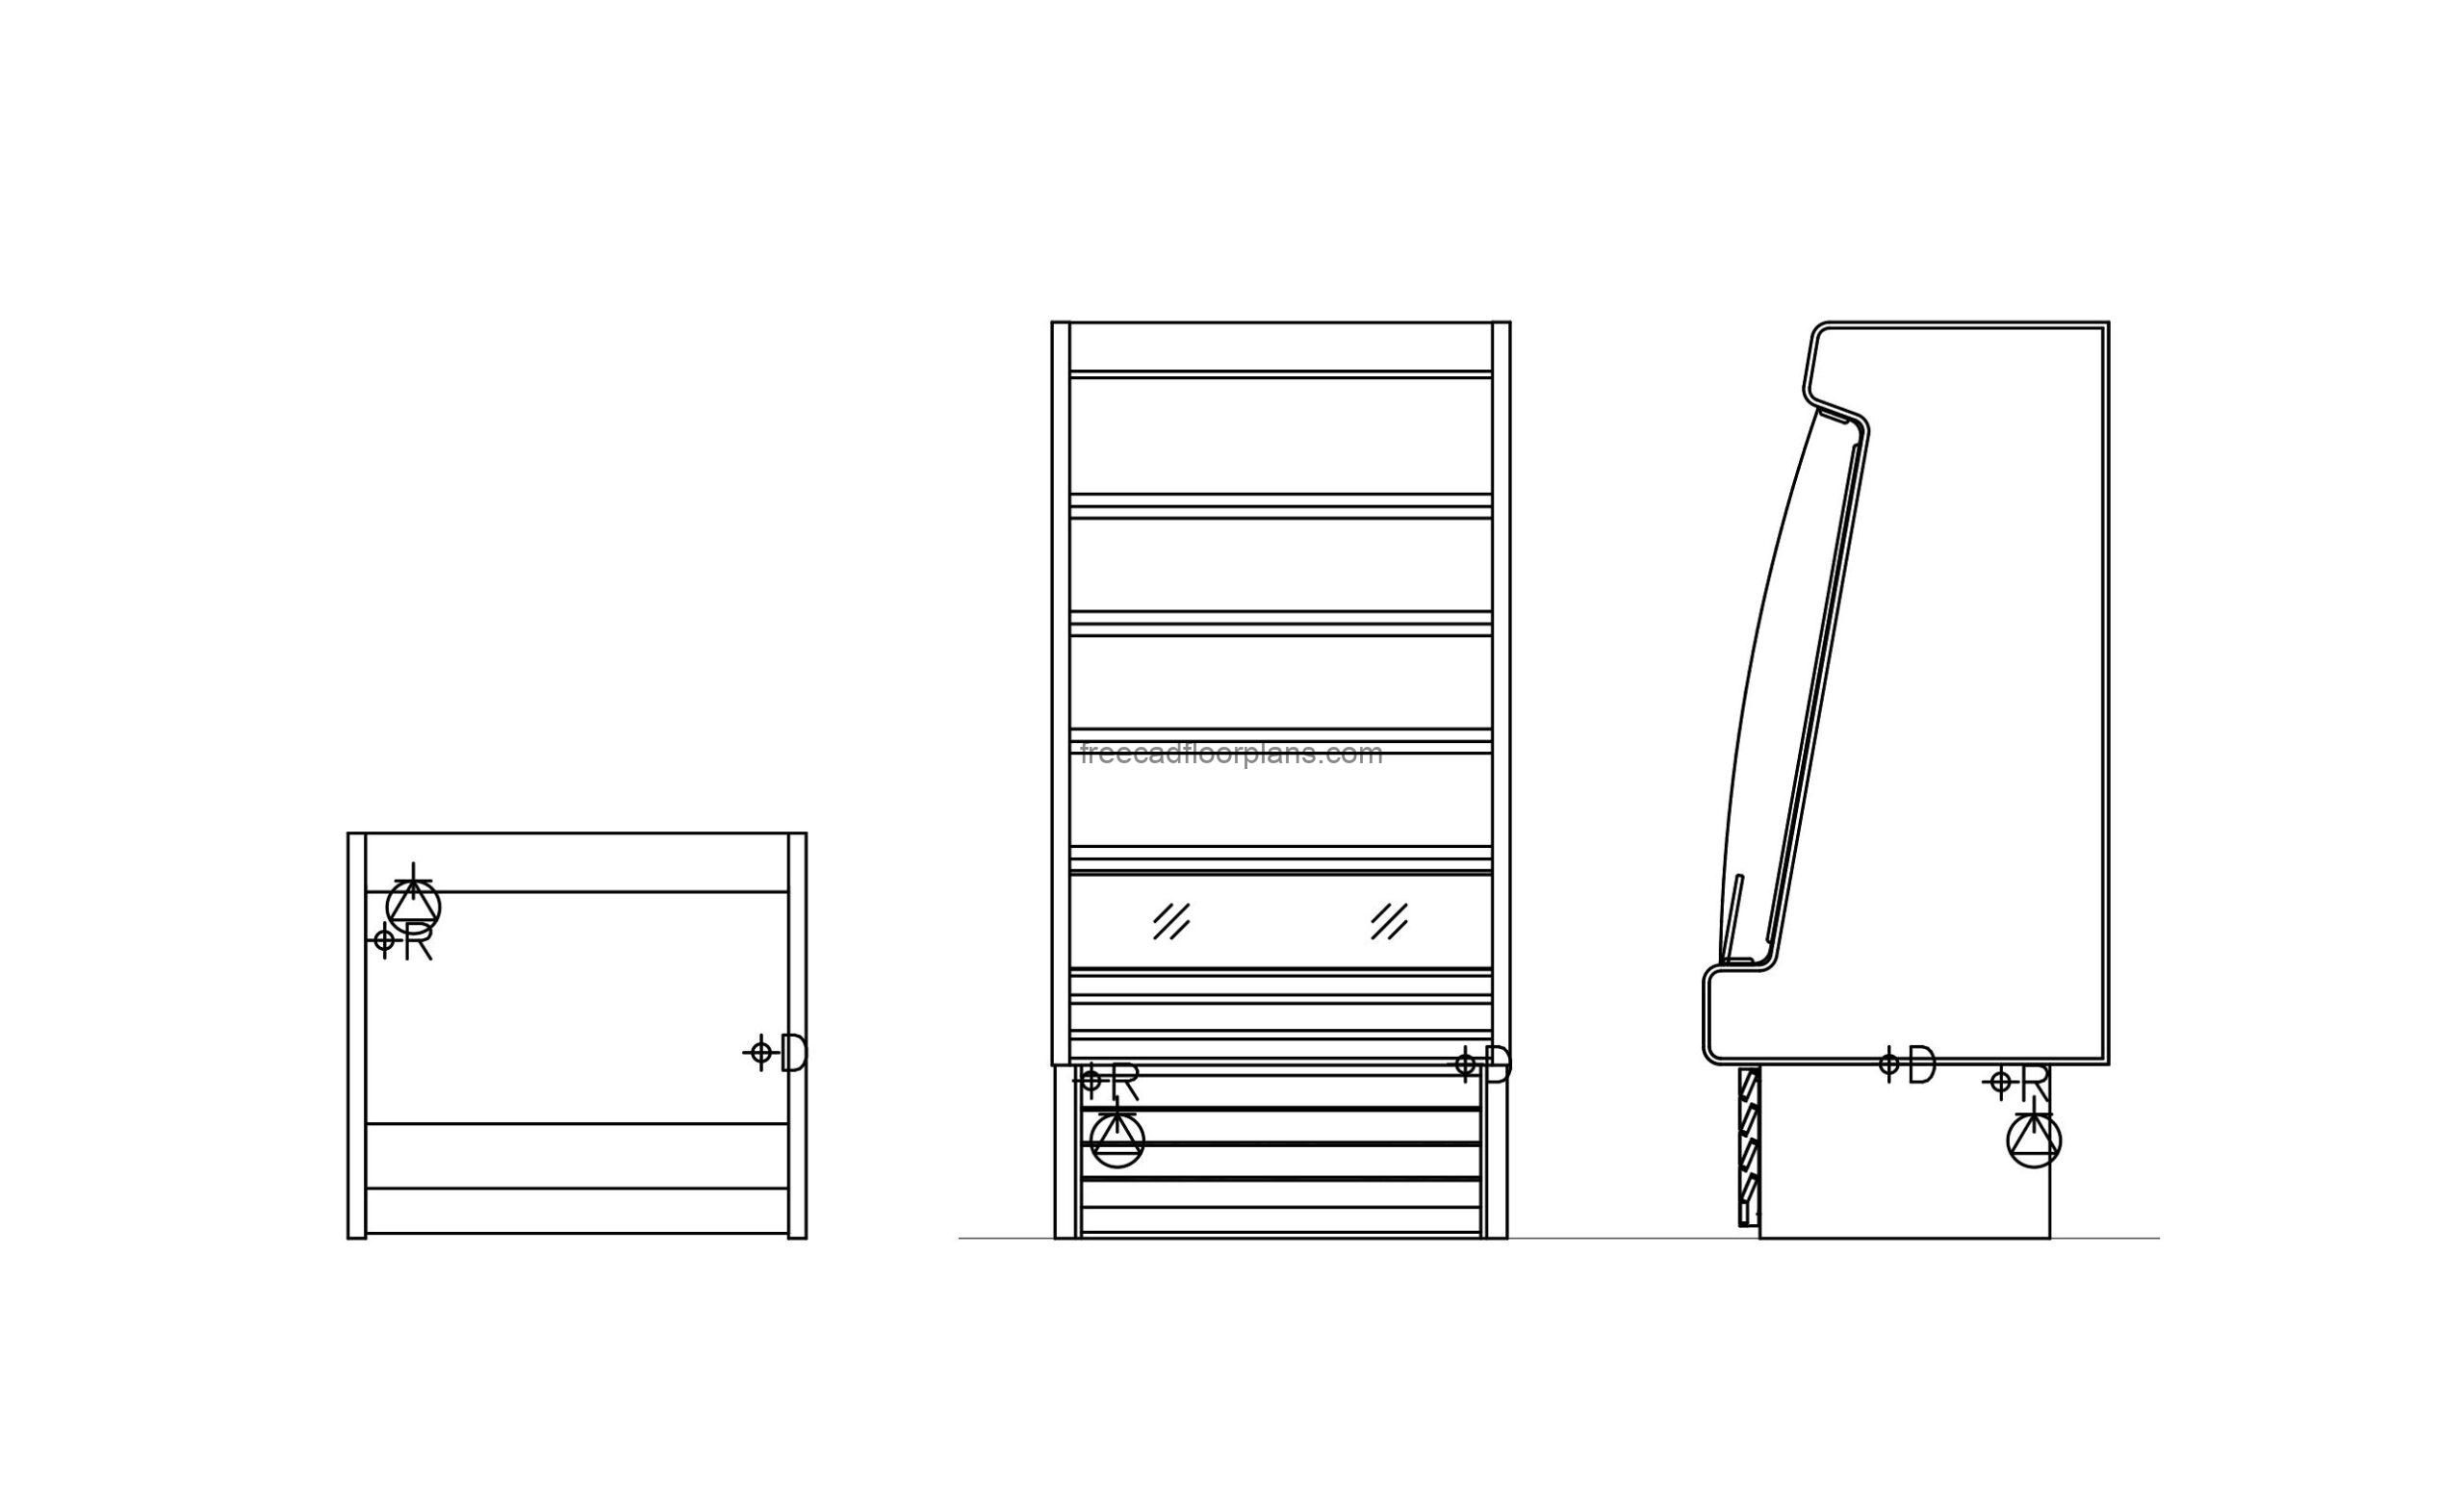 drawing cad block ofa open display case for dairy and meat, top view, side and front views for free download